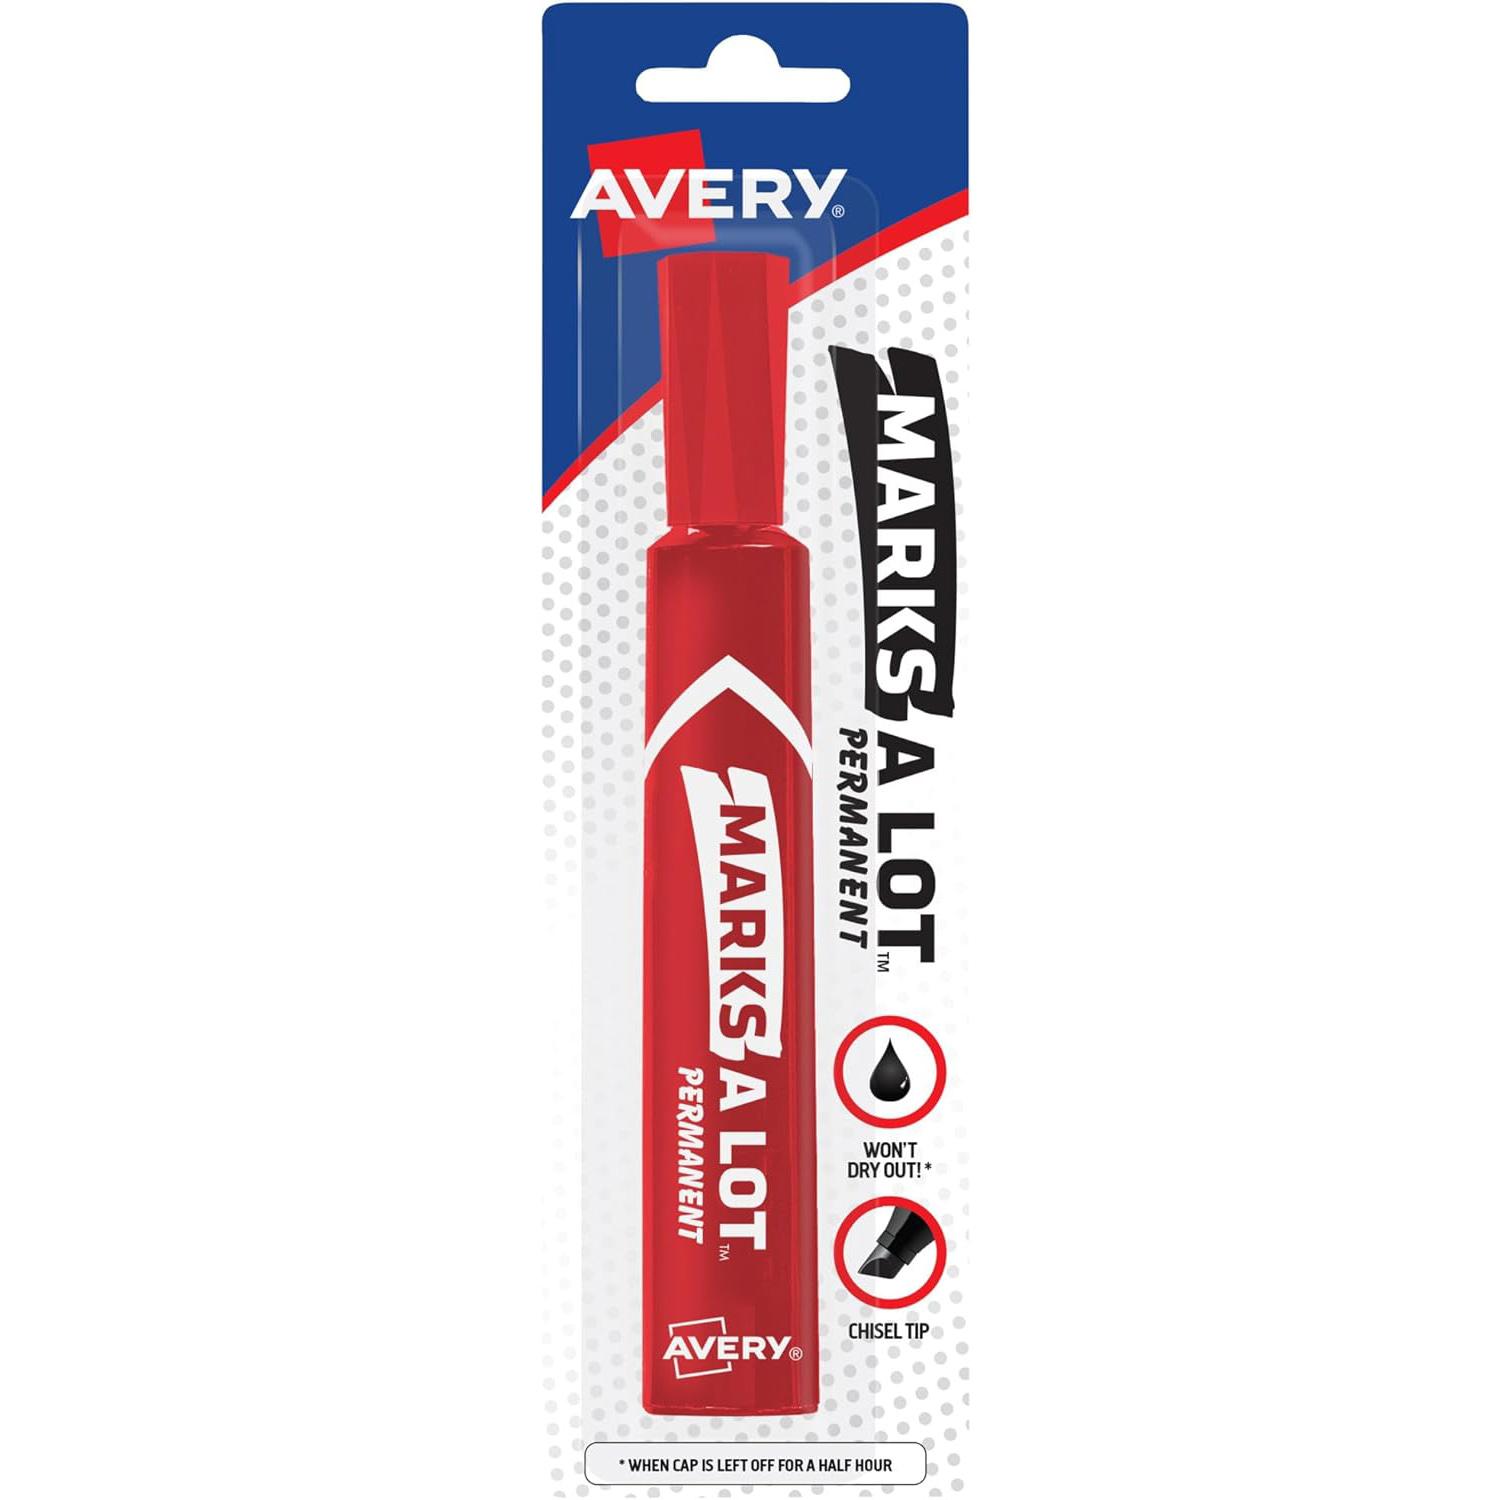 Avery Marks-A-Lot Red 17887 Permanent Marker for $1.06